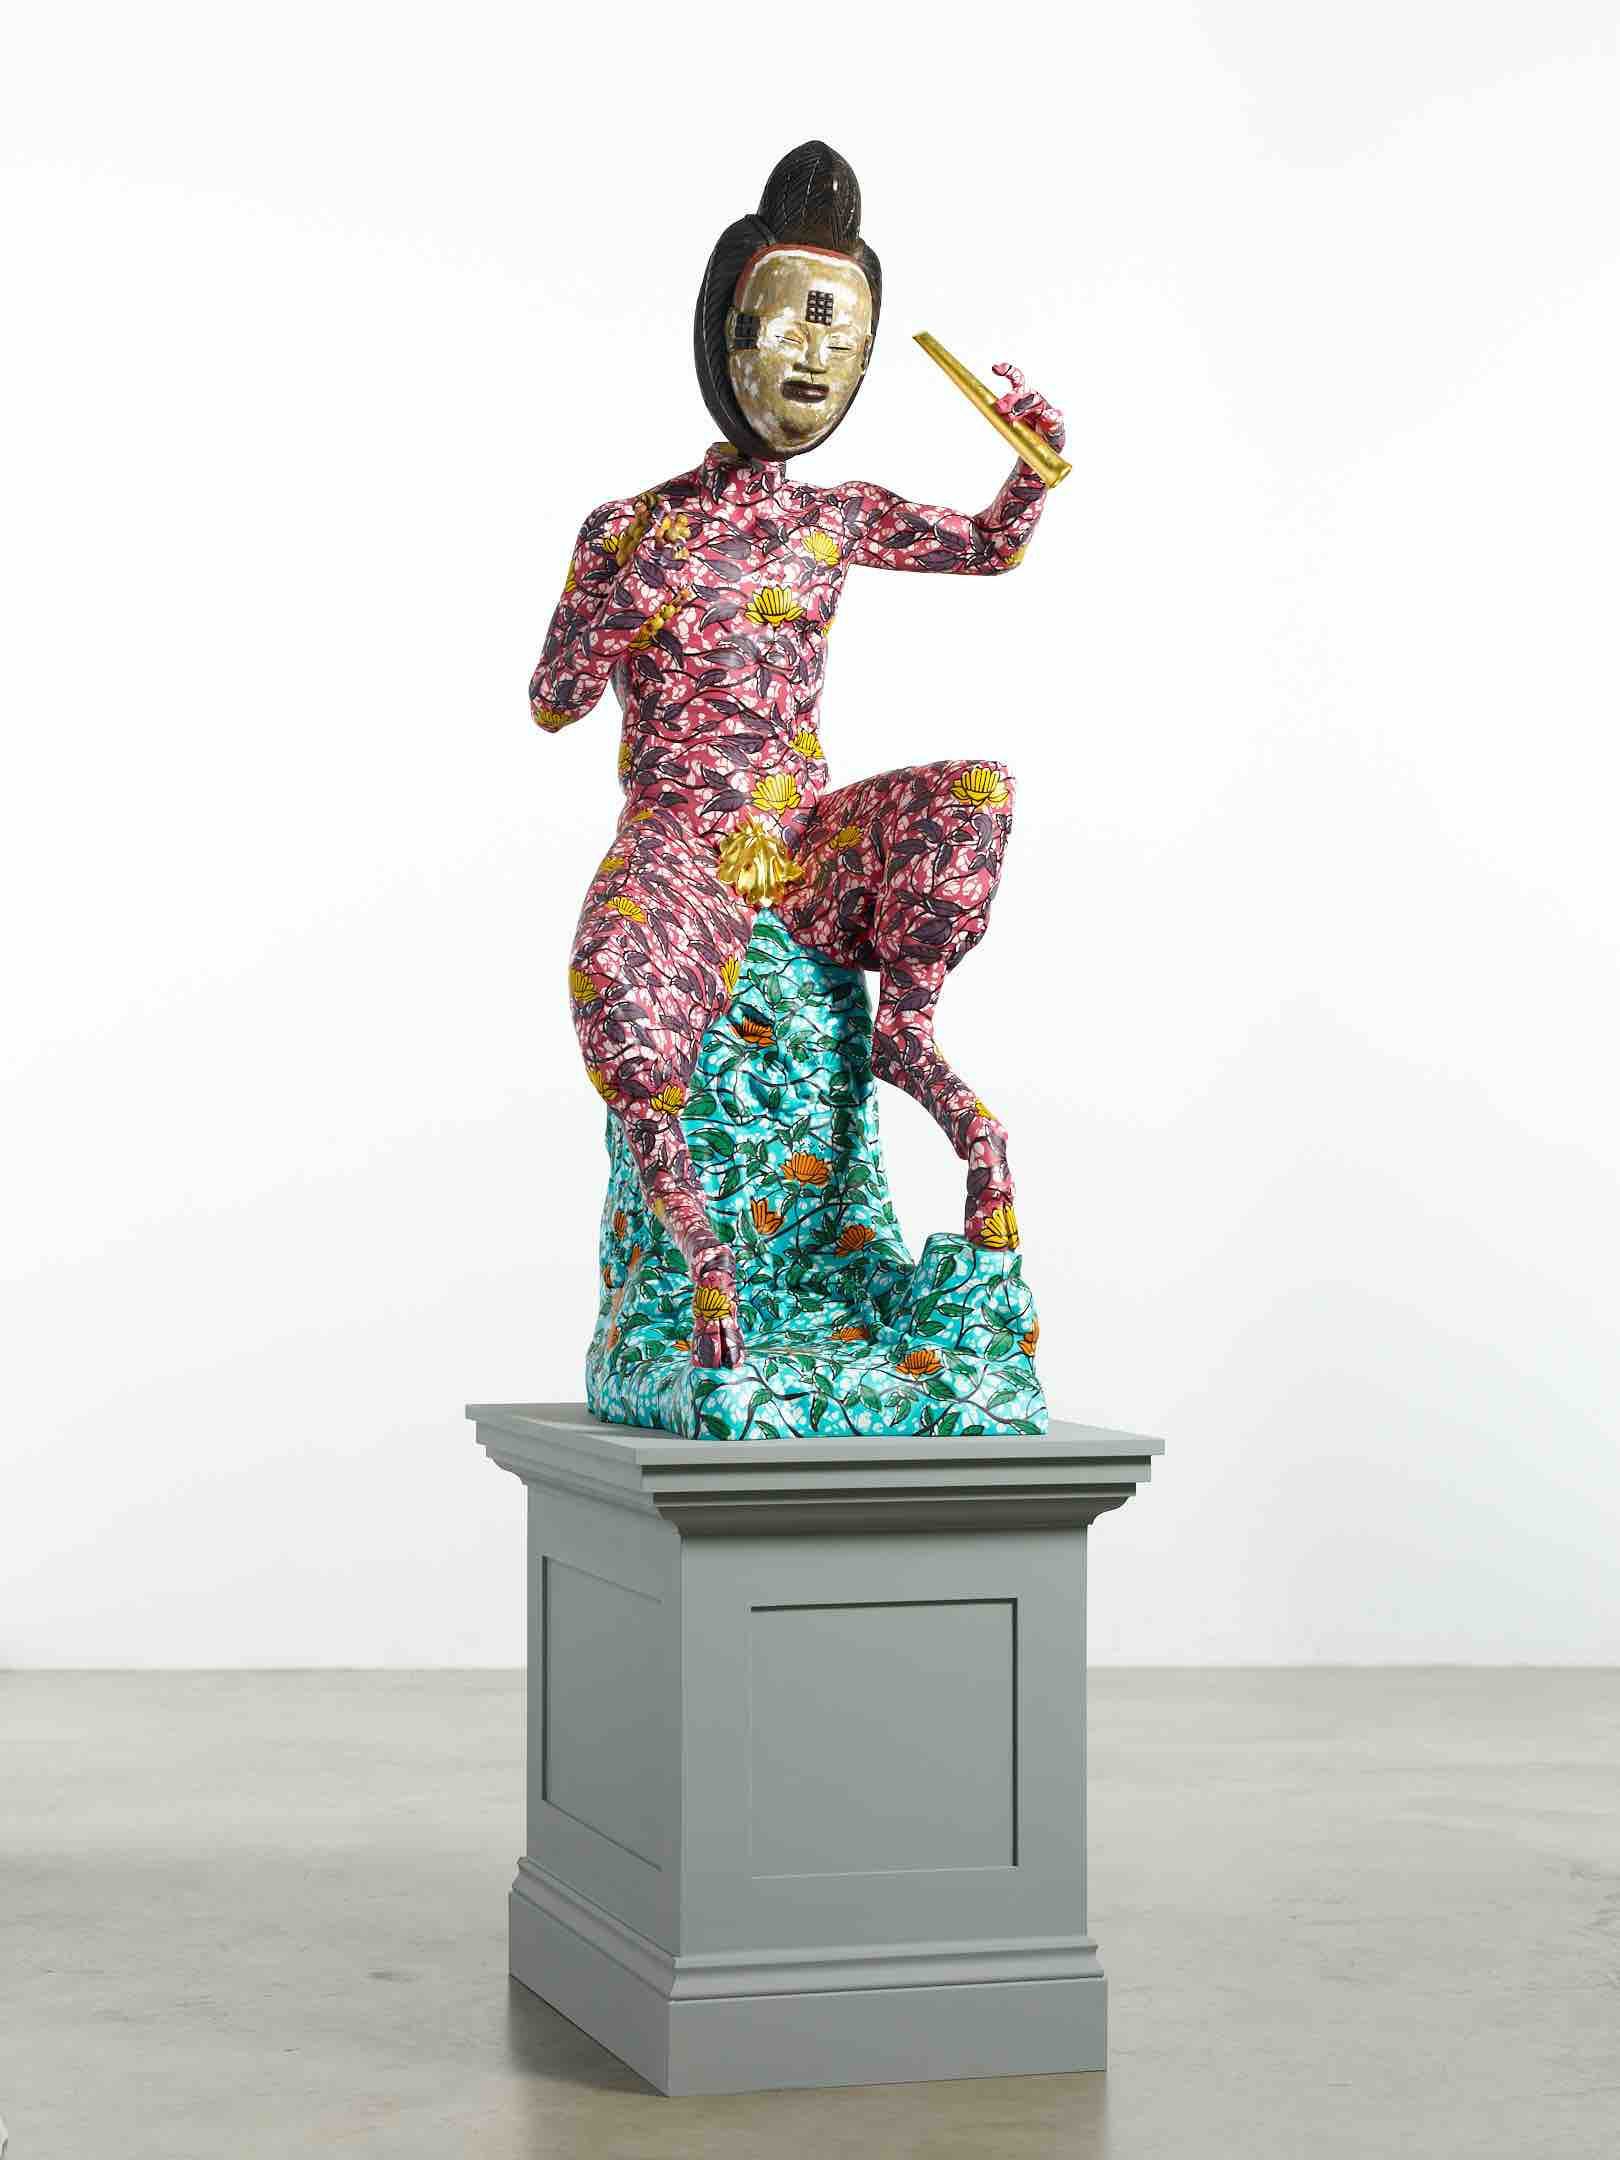 Yinka Shonibare CBE, 'Pan', 2020. Classical sculpture, Figure: 156 x 65 x 68cm (61 3/8 x 25 5/8 x 26 3/4in). Plinth: 70 x 60 x 87.5cm (27 1/2 x 23 5/8 x 34 1/2in). Overall: 226 x 65 x 87.5cm (89 x 25 5/8 x 34 1/2in). Copyright Yinka Shonibare CBE. Courtesy the artist and Stephen Friedman Gallery, London. Photo by Stephen White & Co.